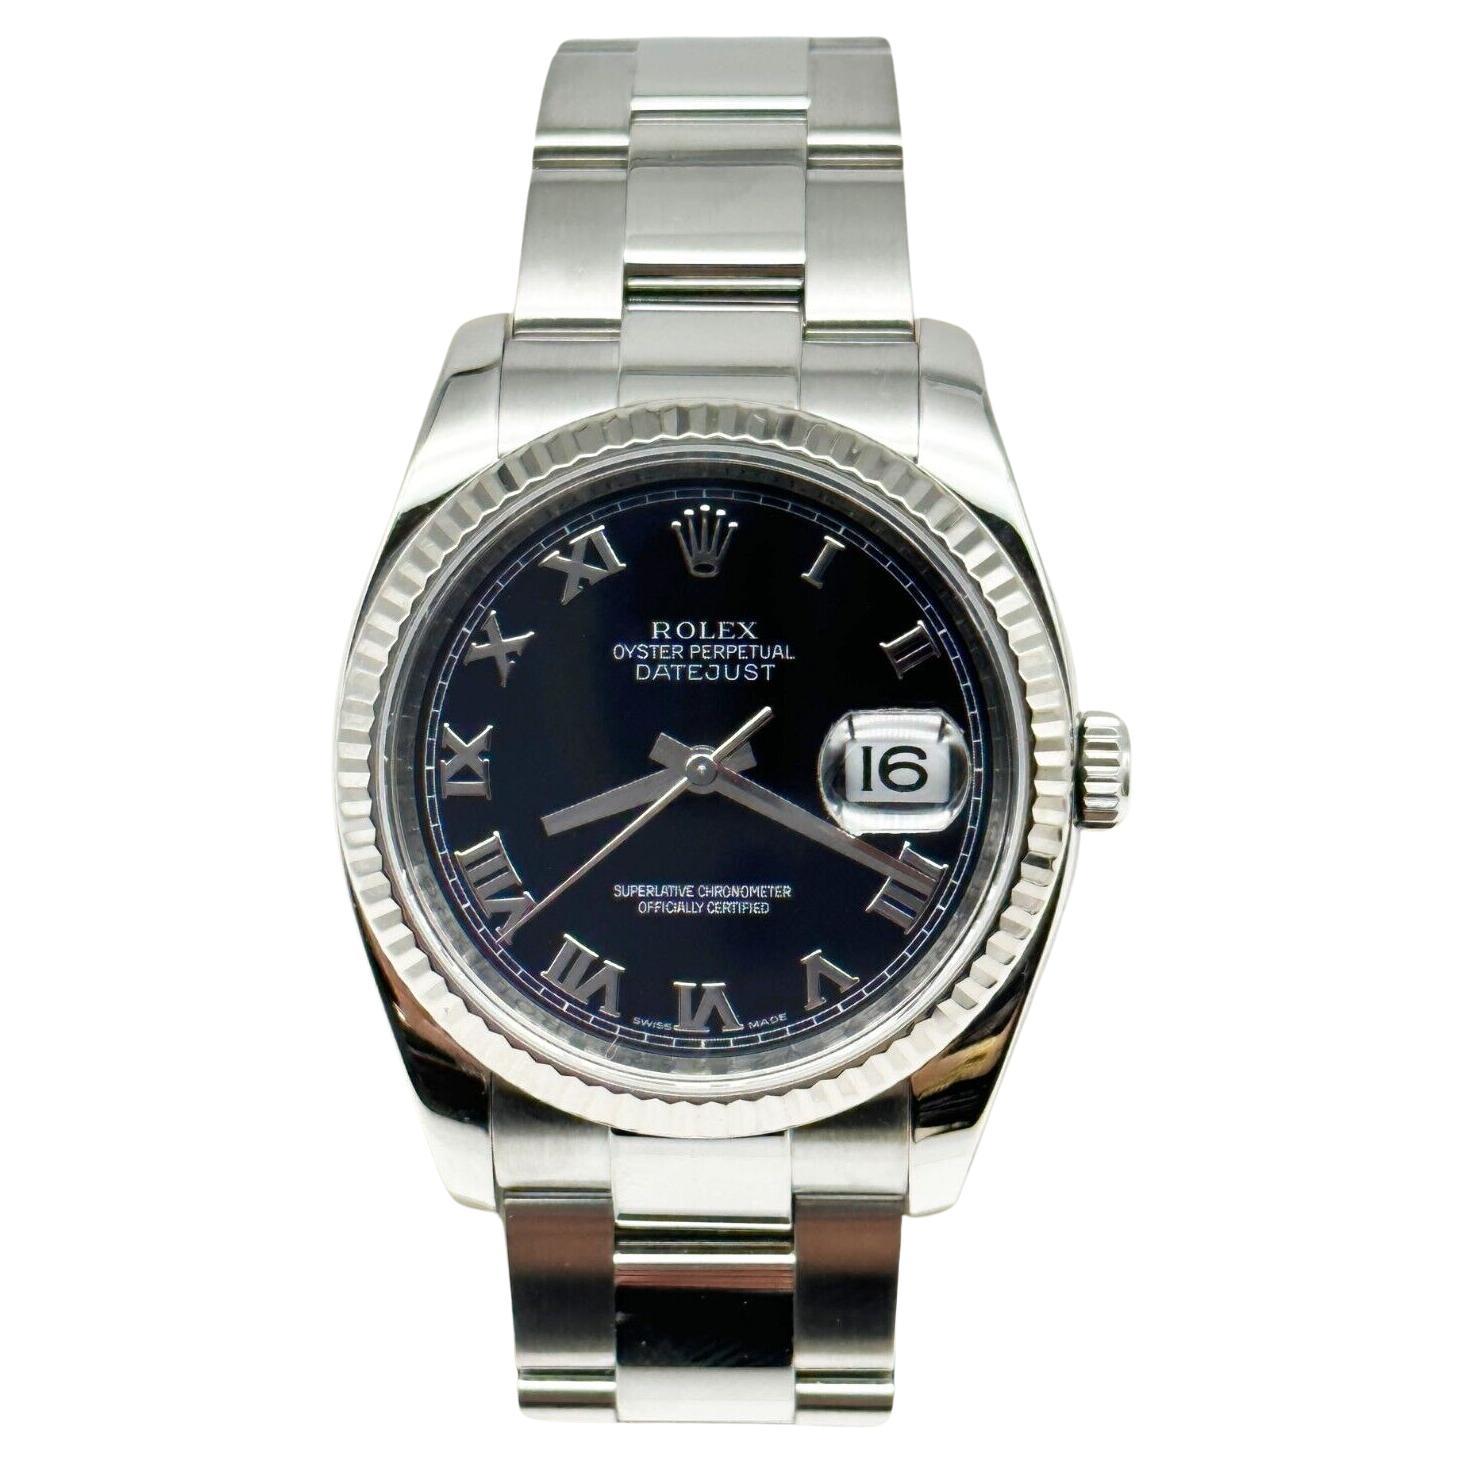 Rolex Datejust 116234 Black Roman Dial Stainless Steel Box Paper 2010 For Sale